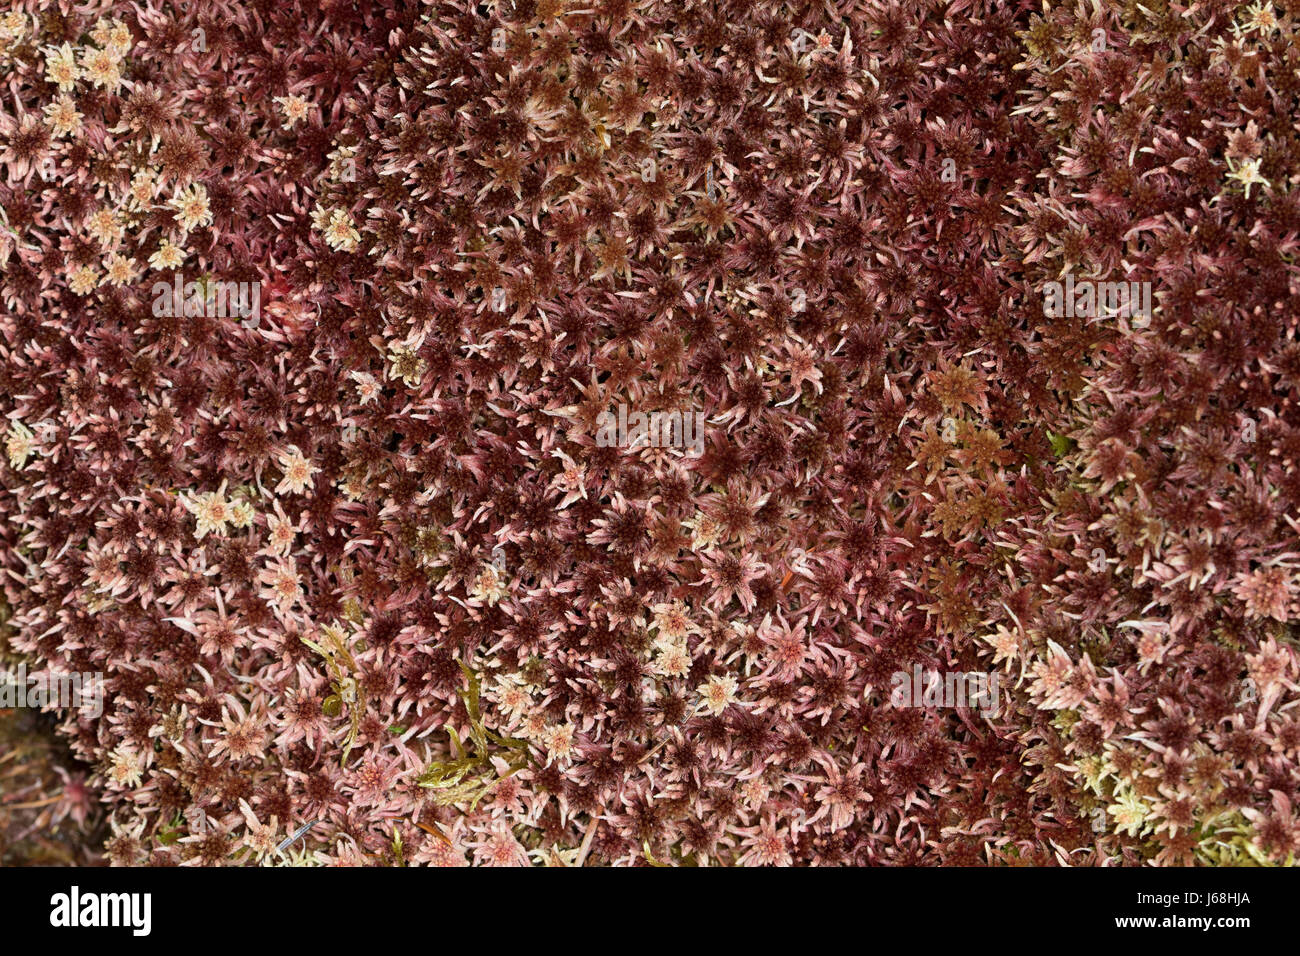 Sphagnum moss Cut Out Stock Images & Pictures - Alamy